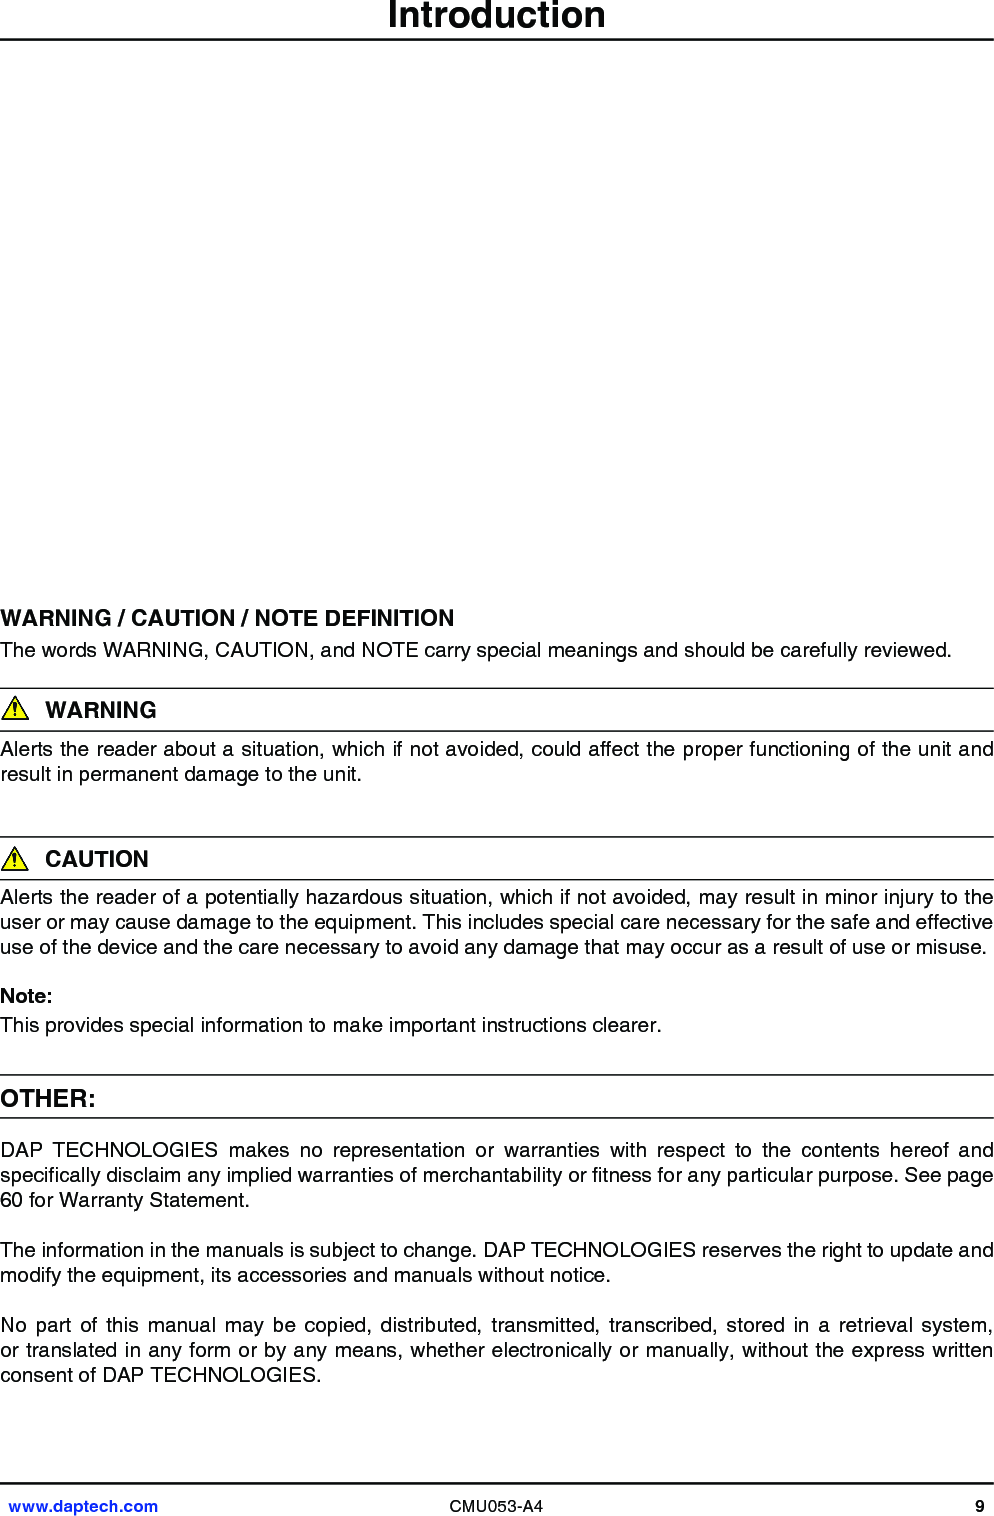 www.daptech.com CMU053-A4 9            WARNING / CAUTION / NOTE DEFINITIONThe words WARNING, CAUTION, and NOTE carry special meanings and should be carefully reviewed.WARNINGAlerts the reader about a situation, which if not avoided, could affect the proper functioning of the unit and result in permanent damage to the unit.  CAUTIONAlerts the reader of a potentially hazardous situation, which if not avoided, may result in minor injury to the user or may cause damage to the equipment. This includes special care necessary for the safe and effective use of the device and the care necessary to avoid any damage that may occur as a result of use or misuse.Note:This provides special information to make important instructions clearer.OTHER:DAP  TECHNOLOGIES  makes  no  representation  or  warranties  with  respect  to  the  contents  hereof  and specically disclaim any implied warranties of merchantability or tness for any particular purpose. See page 60 for Warranty Statement.The information in the manuals is subject to change. DAP TECHNOLOGIES reserves the right to update and modify the equipment, its accessories and manuals without notice.No  part  of  this  manual  may  be  copied,  distributed,  transmitted,  transcribed,  stored  in  a  retrieval  system, or translated in any form or by any means, whether electronically or manually, without the express written consent of DAP TECHNOLOGIES.Introduction